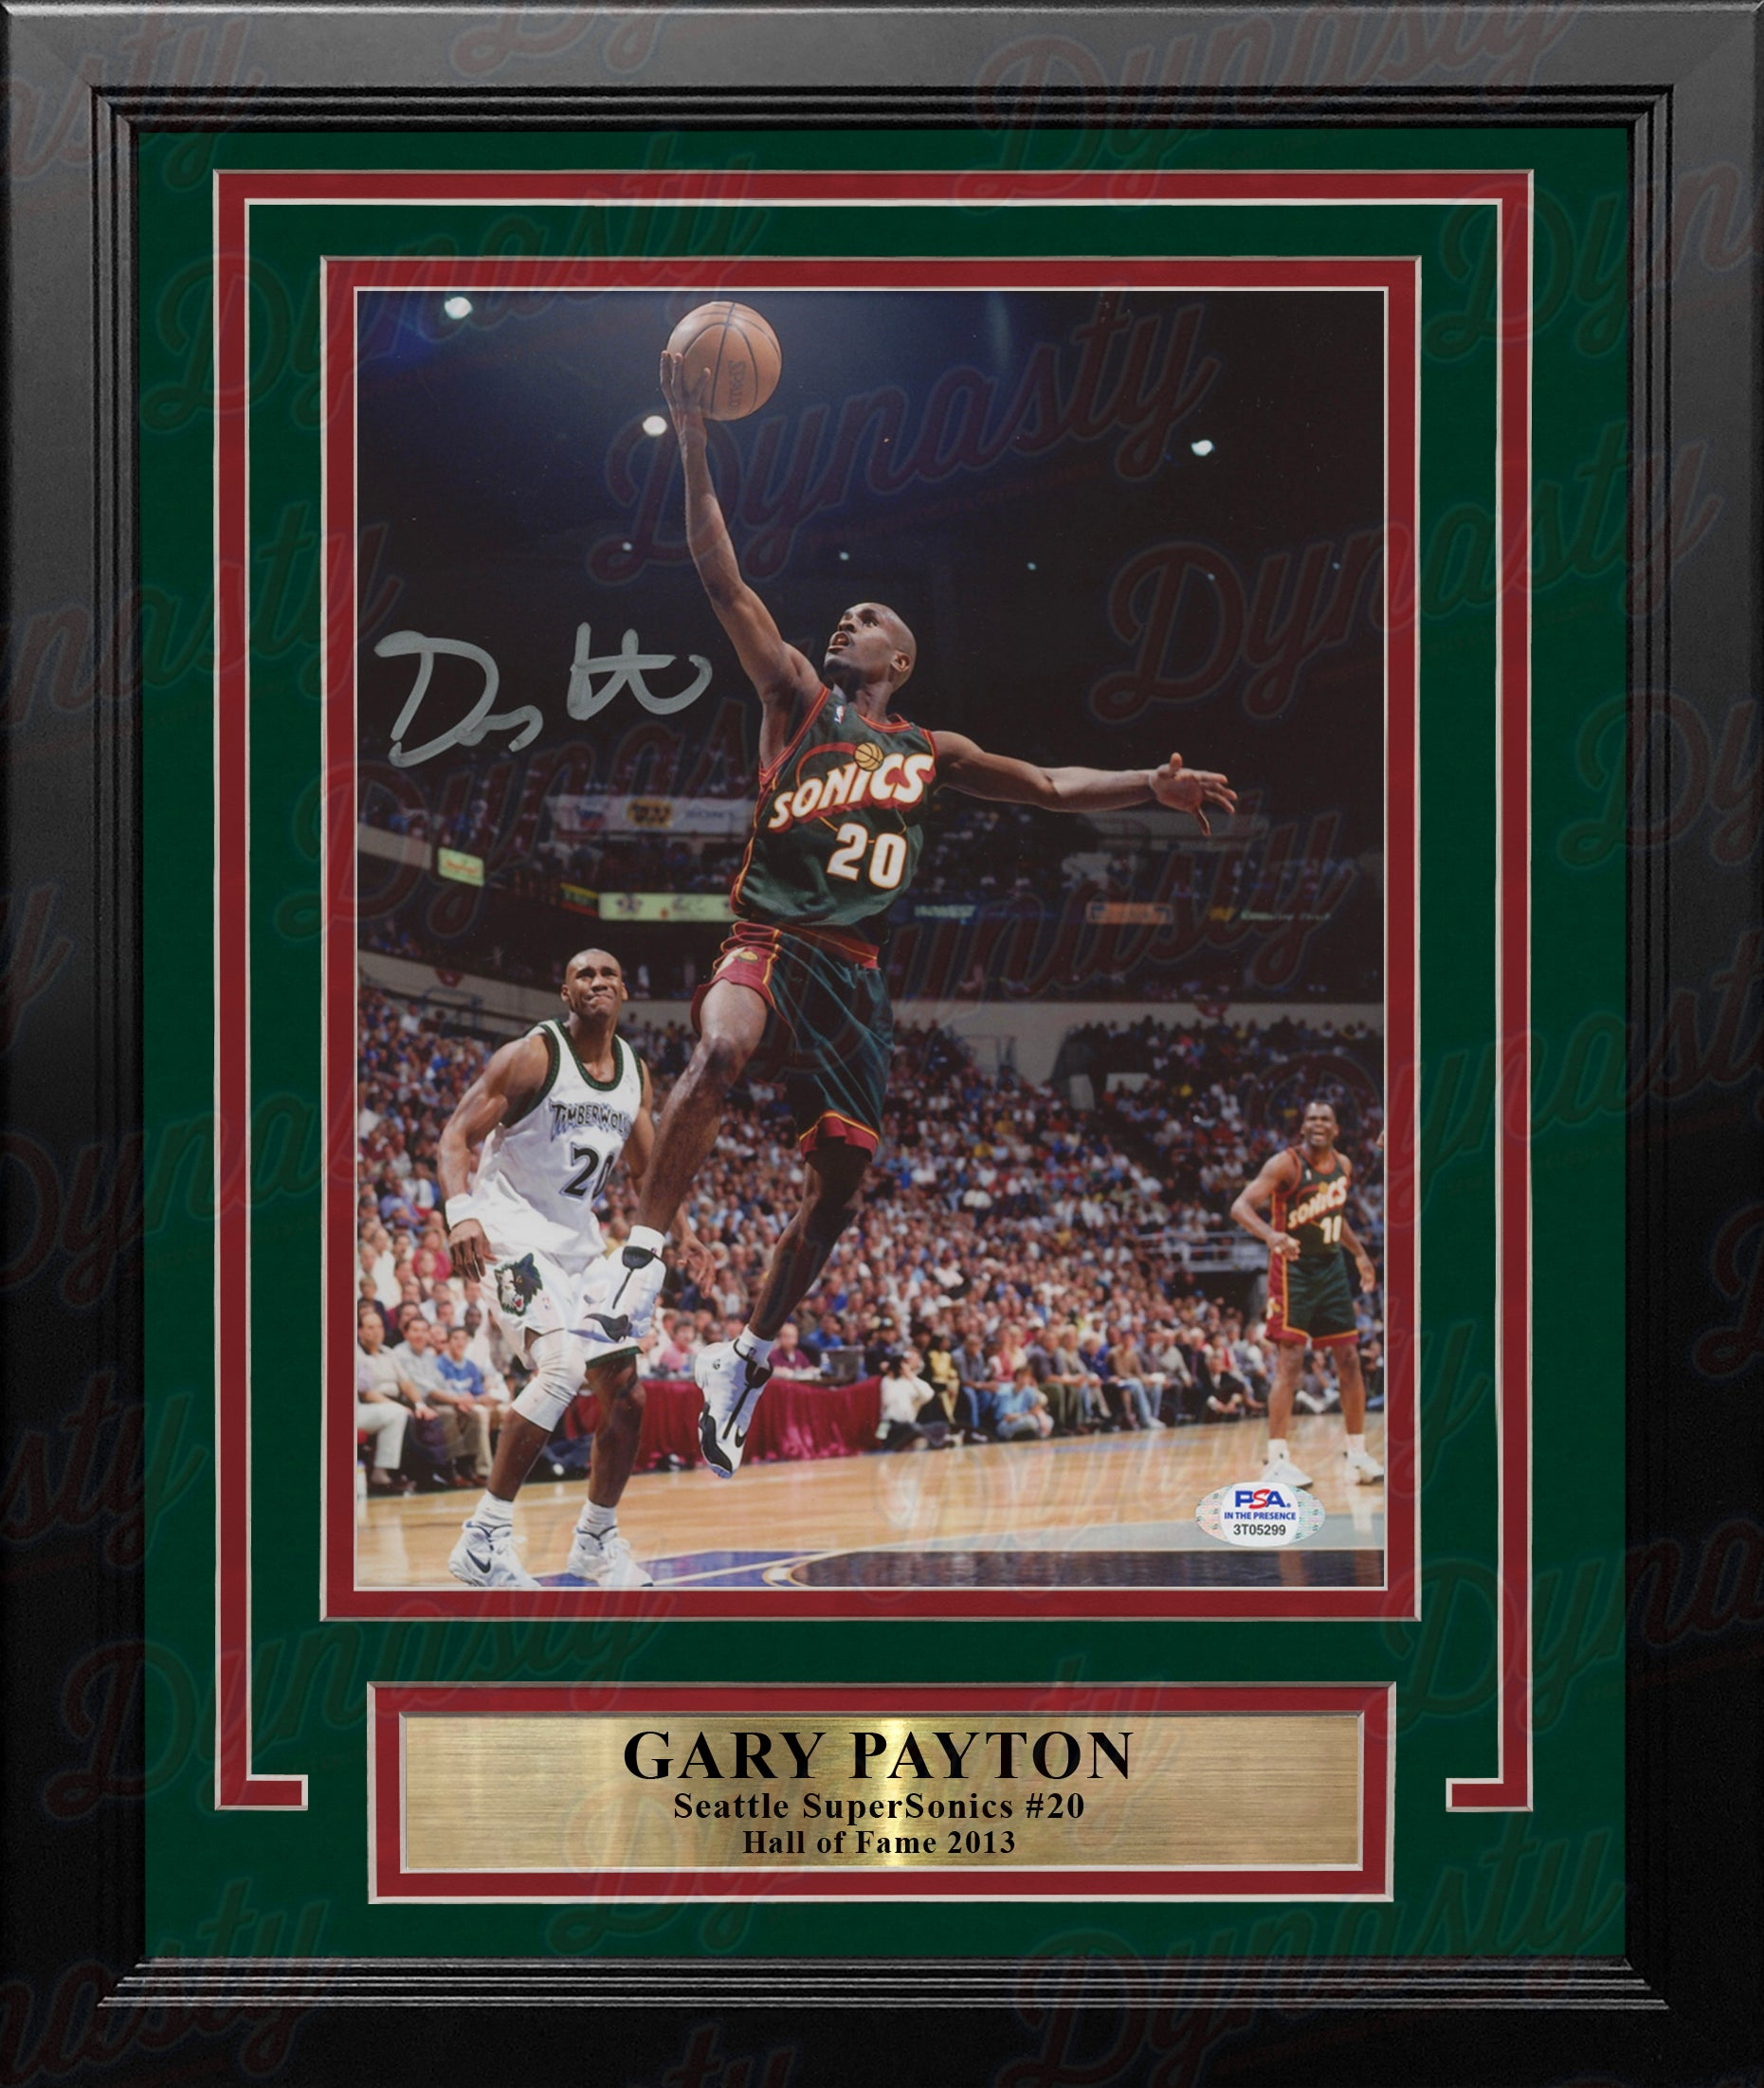 AUTOGRAPHED & FRAMED PRINTS - Gary Payton + Shawn Kemp by Keegan Hall –  Simply Seattle